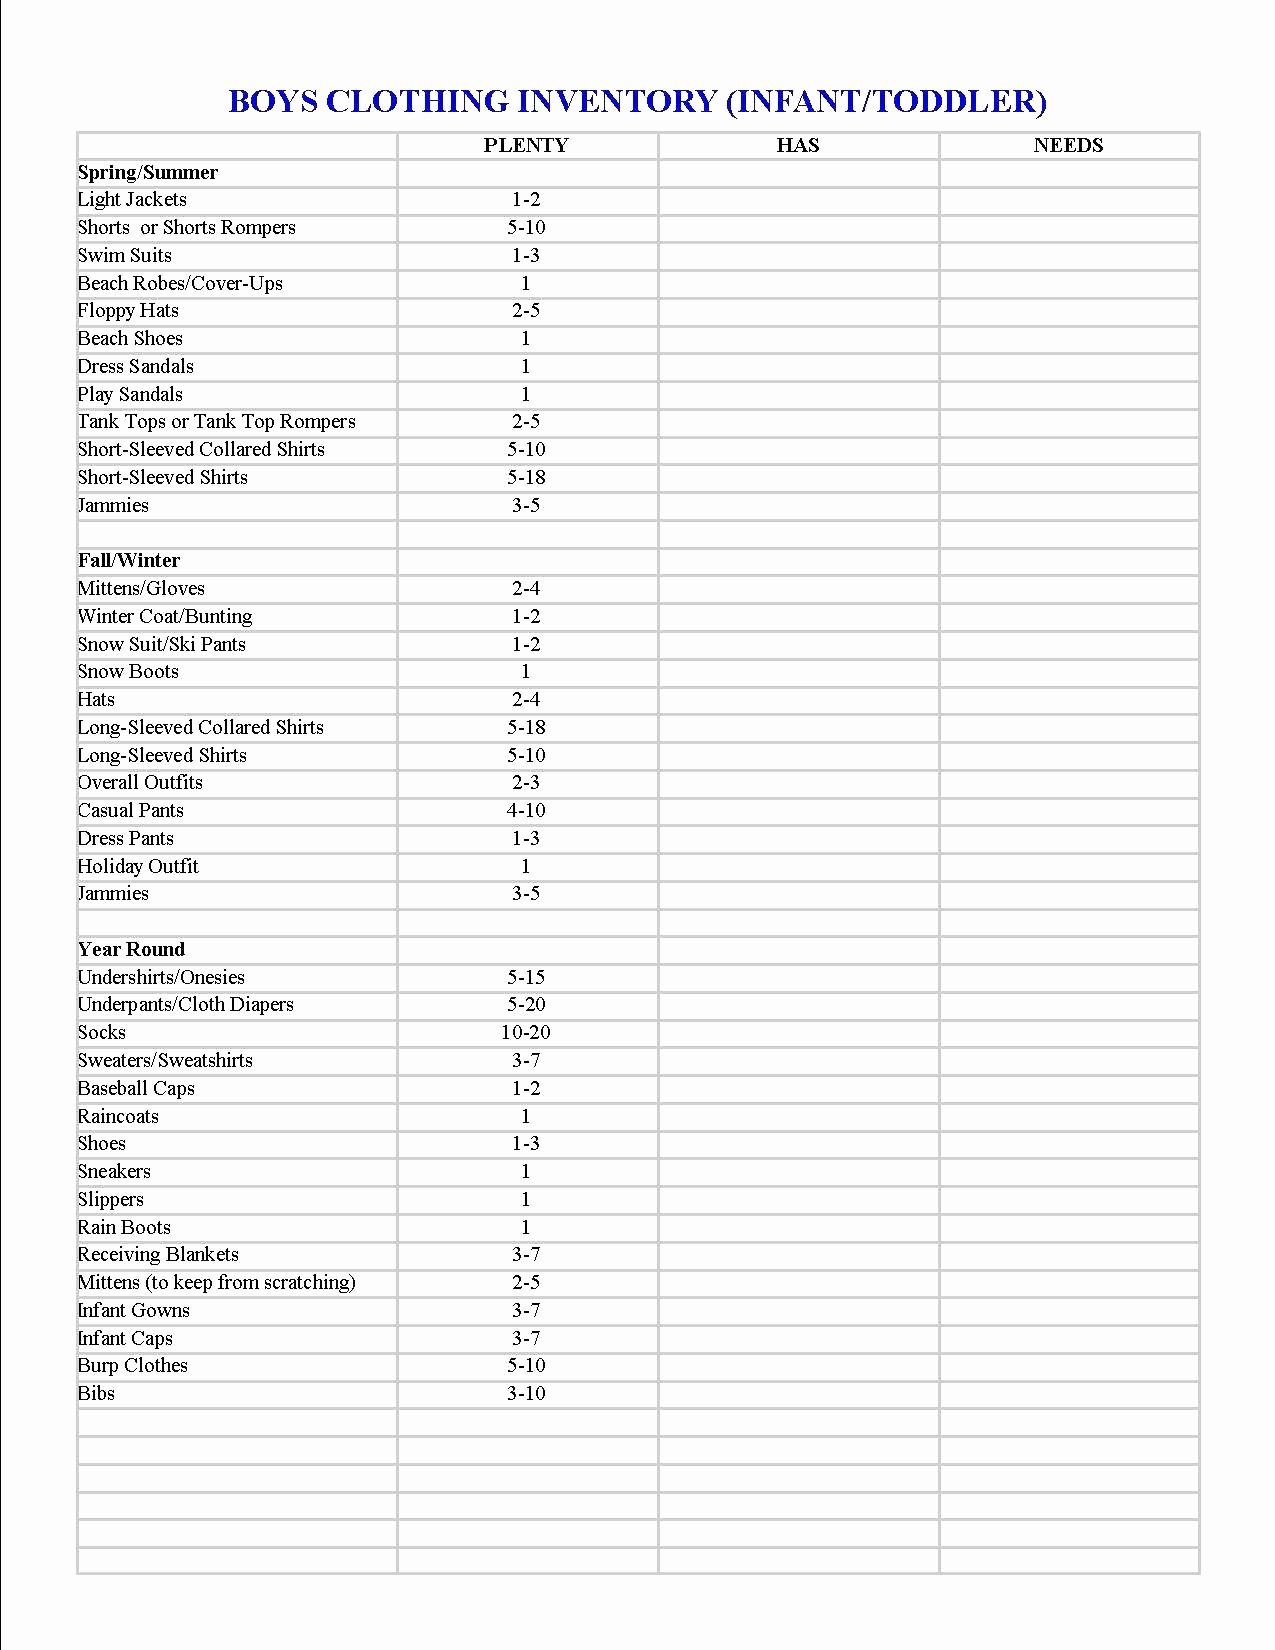 50 Awesome Goodwill Donation Values Worksheet DOCUMENTS IDEAS Document Valuation